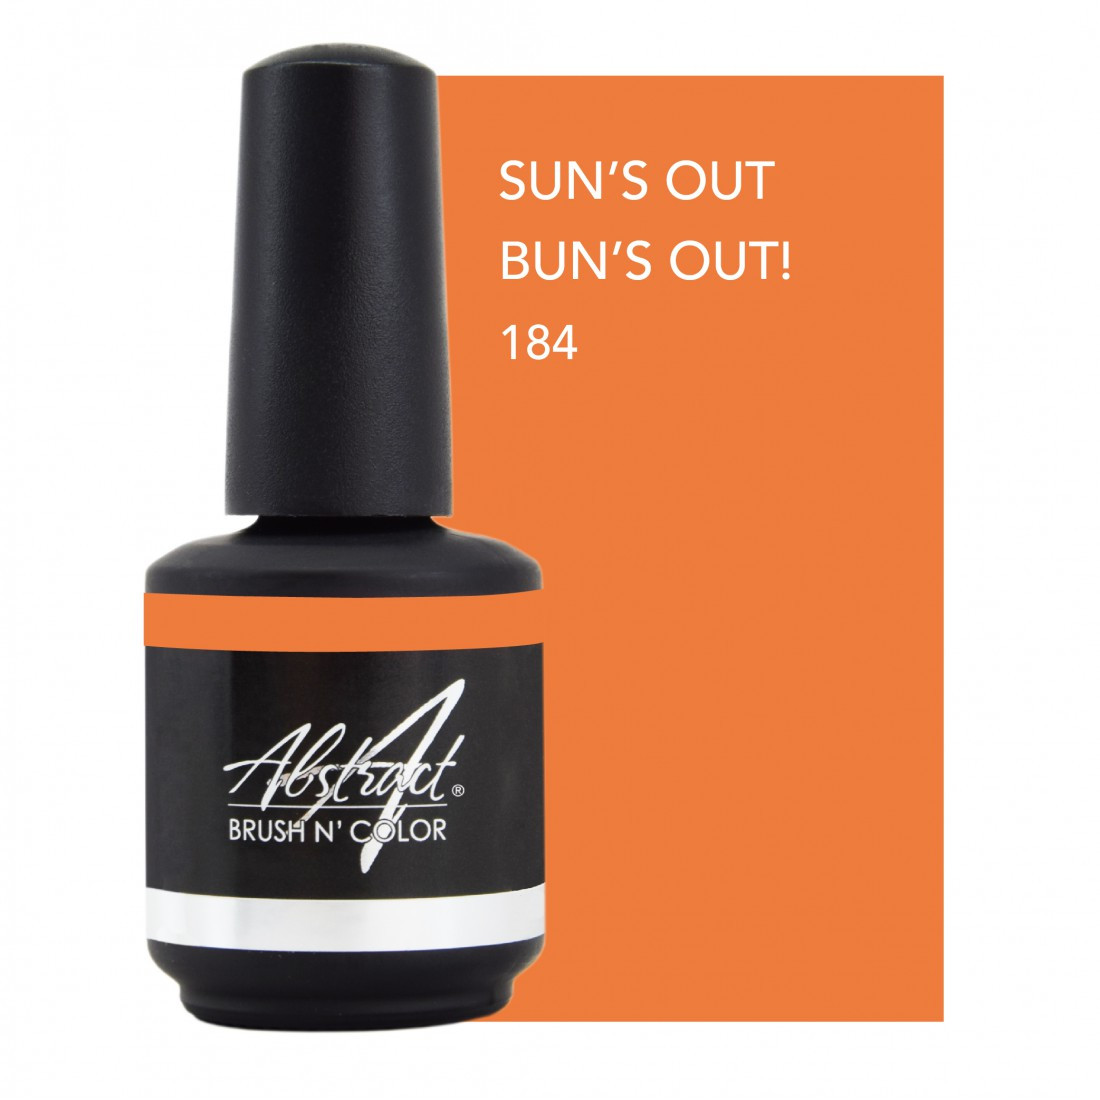 Abstract Sun's out bun's out 15 ml